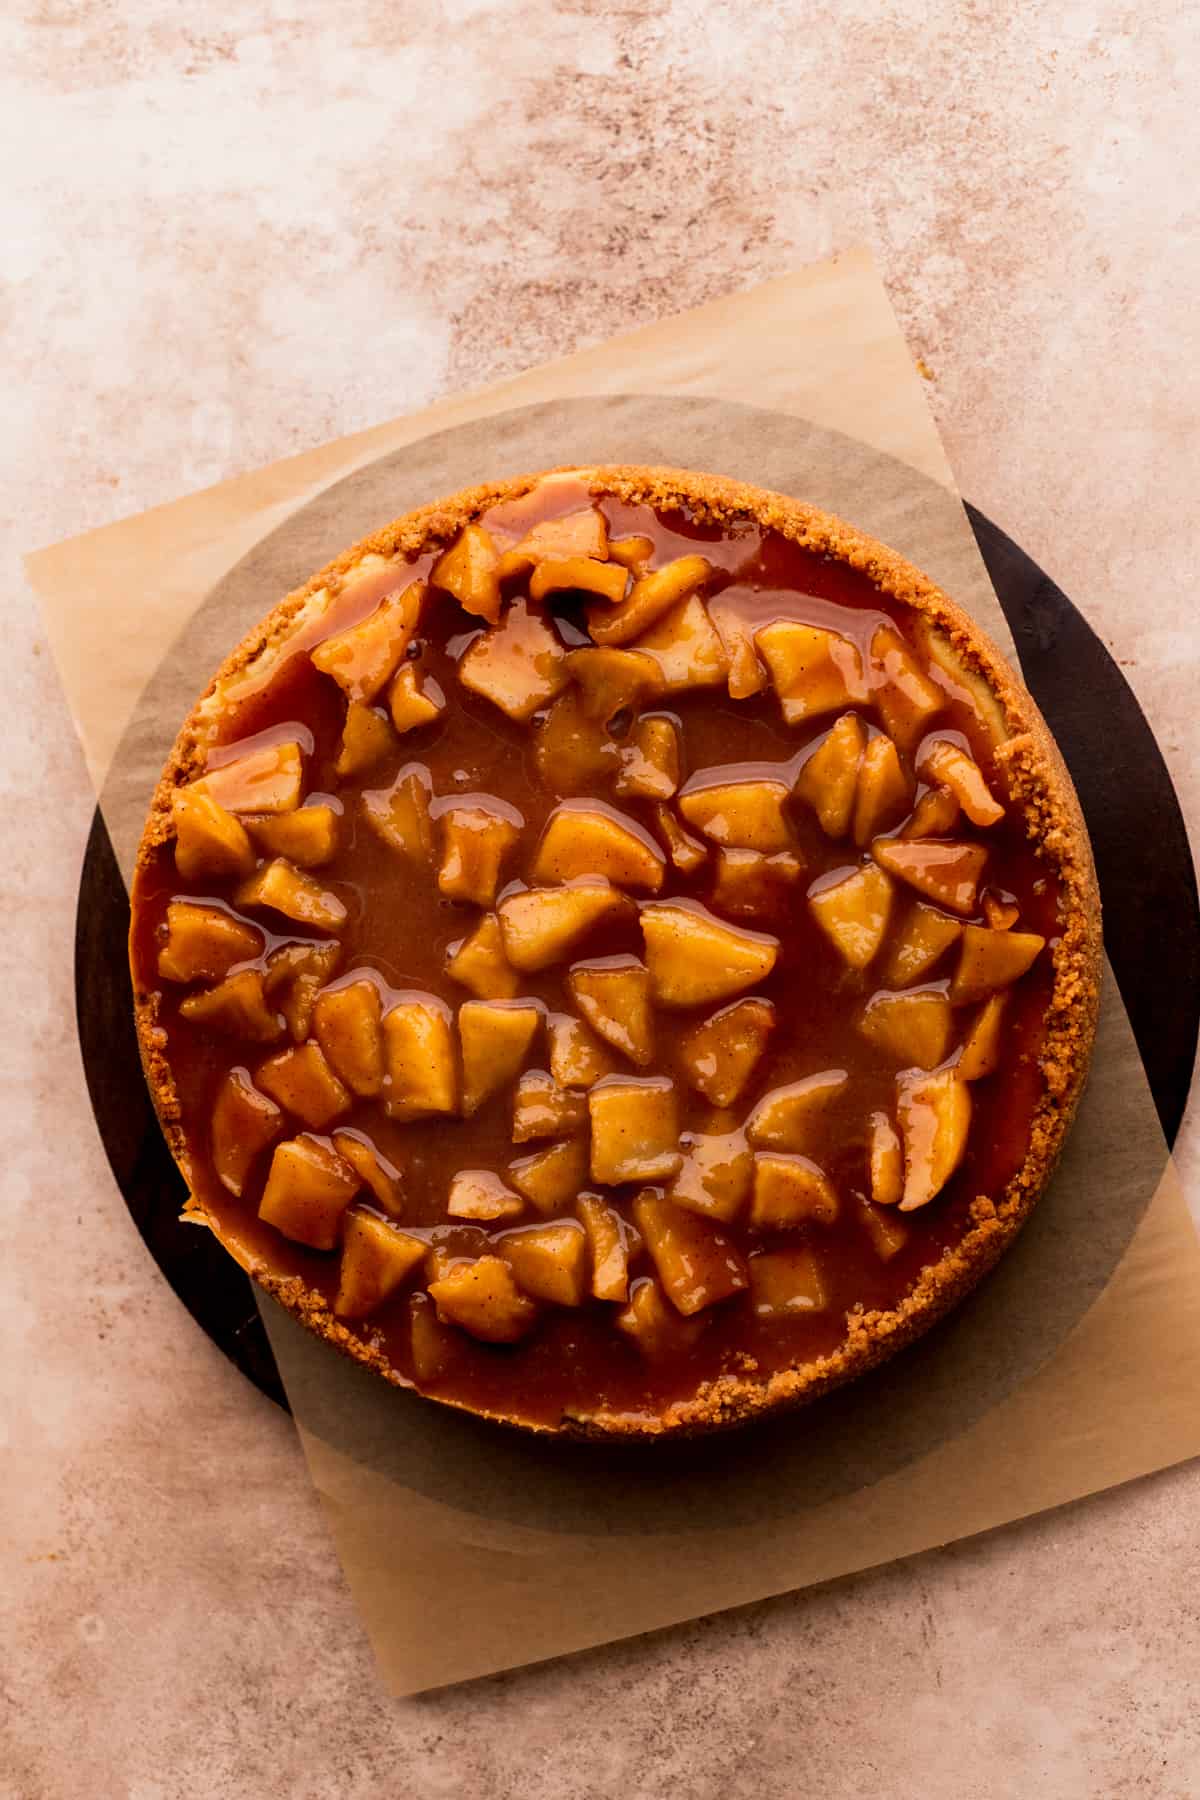 Apple pie topping on top of cheesecake.